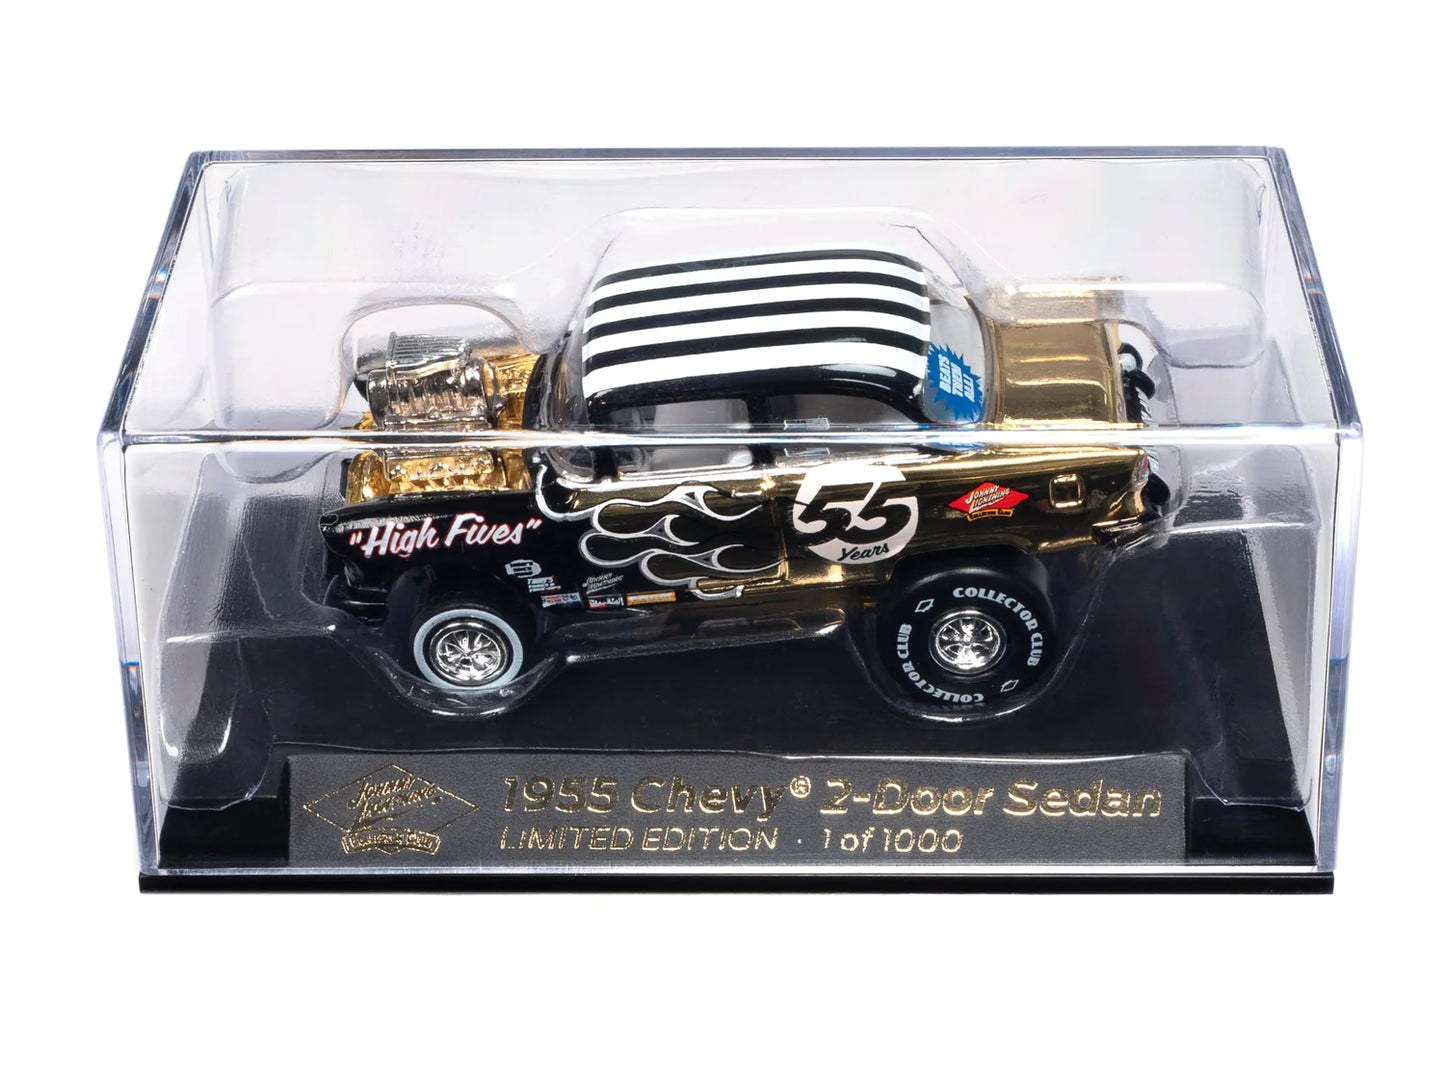 Johnny Lightning 1955 Chevy Bel Air Zinger (AW Exclusive) - JLCC011 - Limited Edition - Gasser